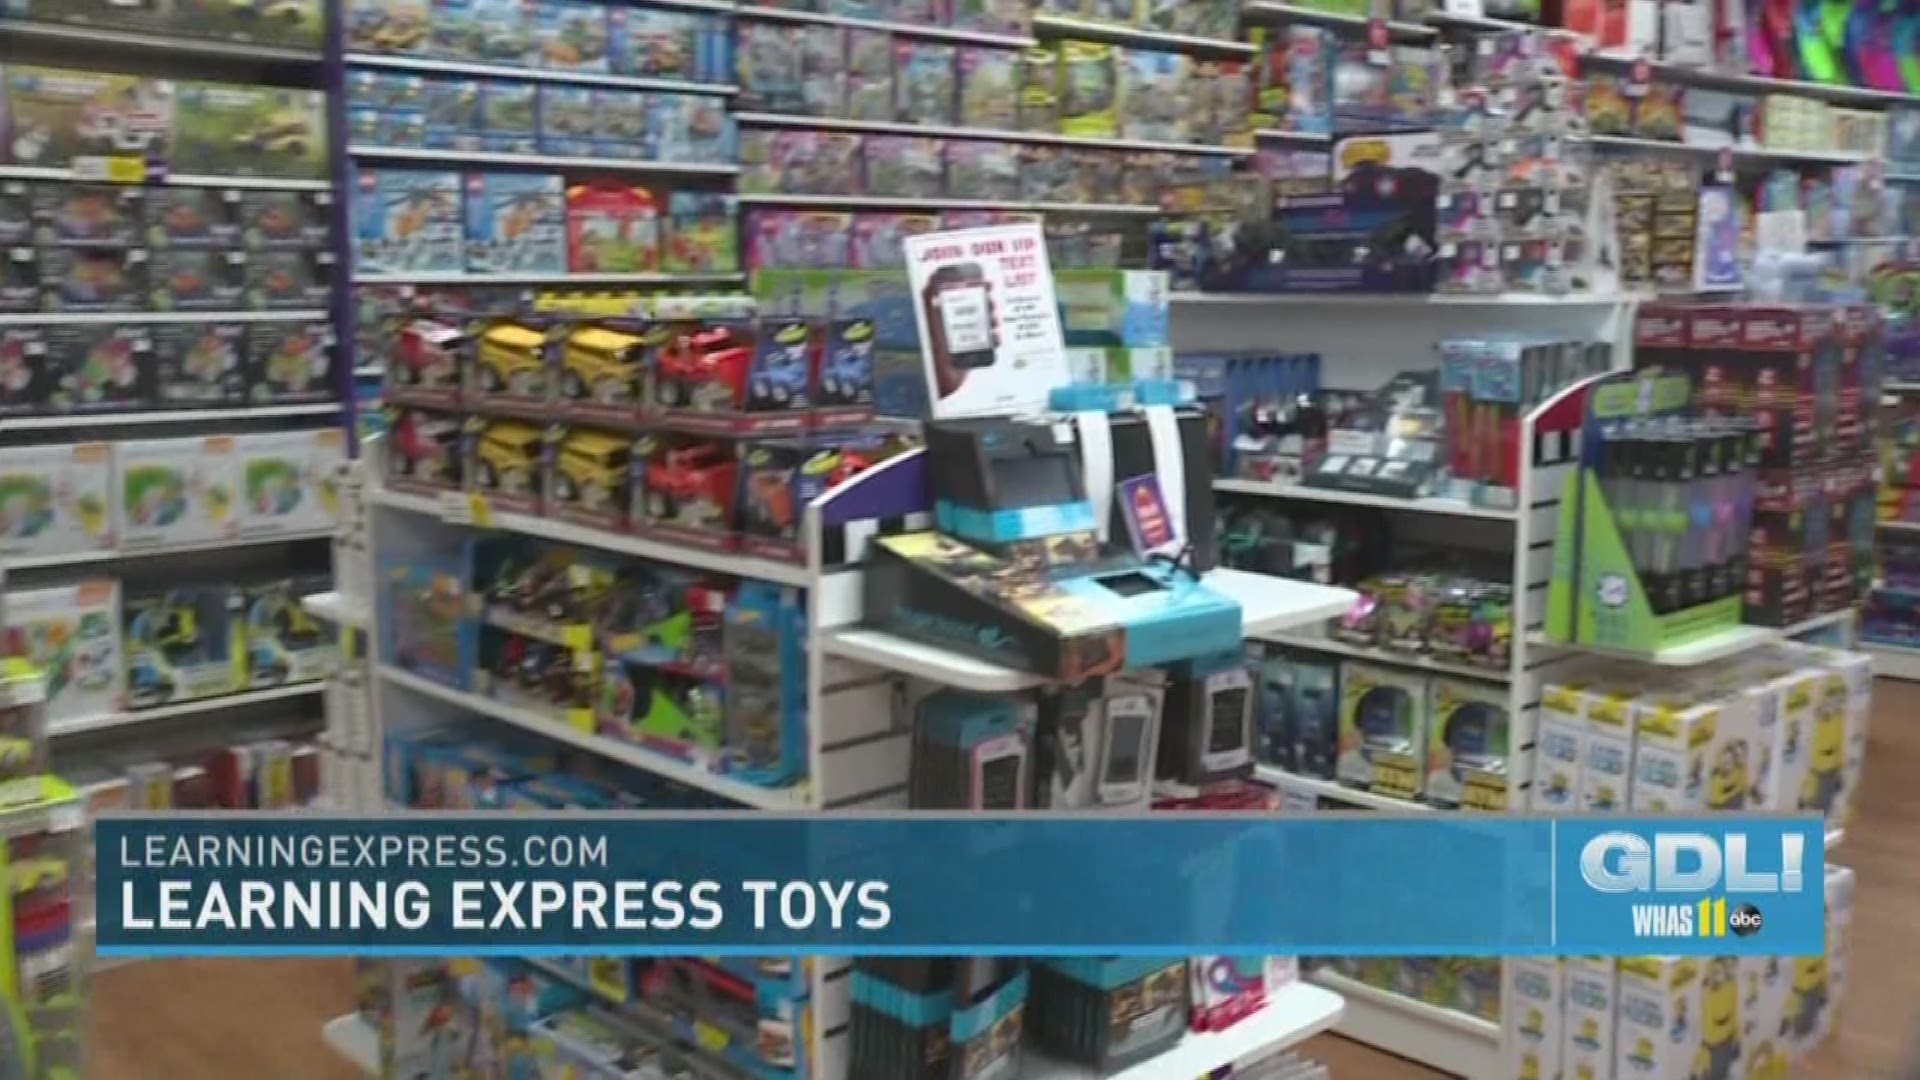 The newest - Learning Express Toys of Collegeville, PA